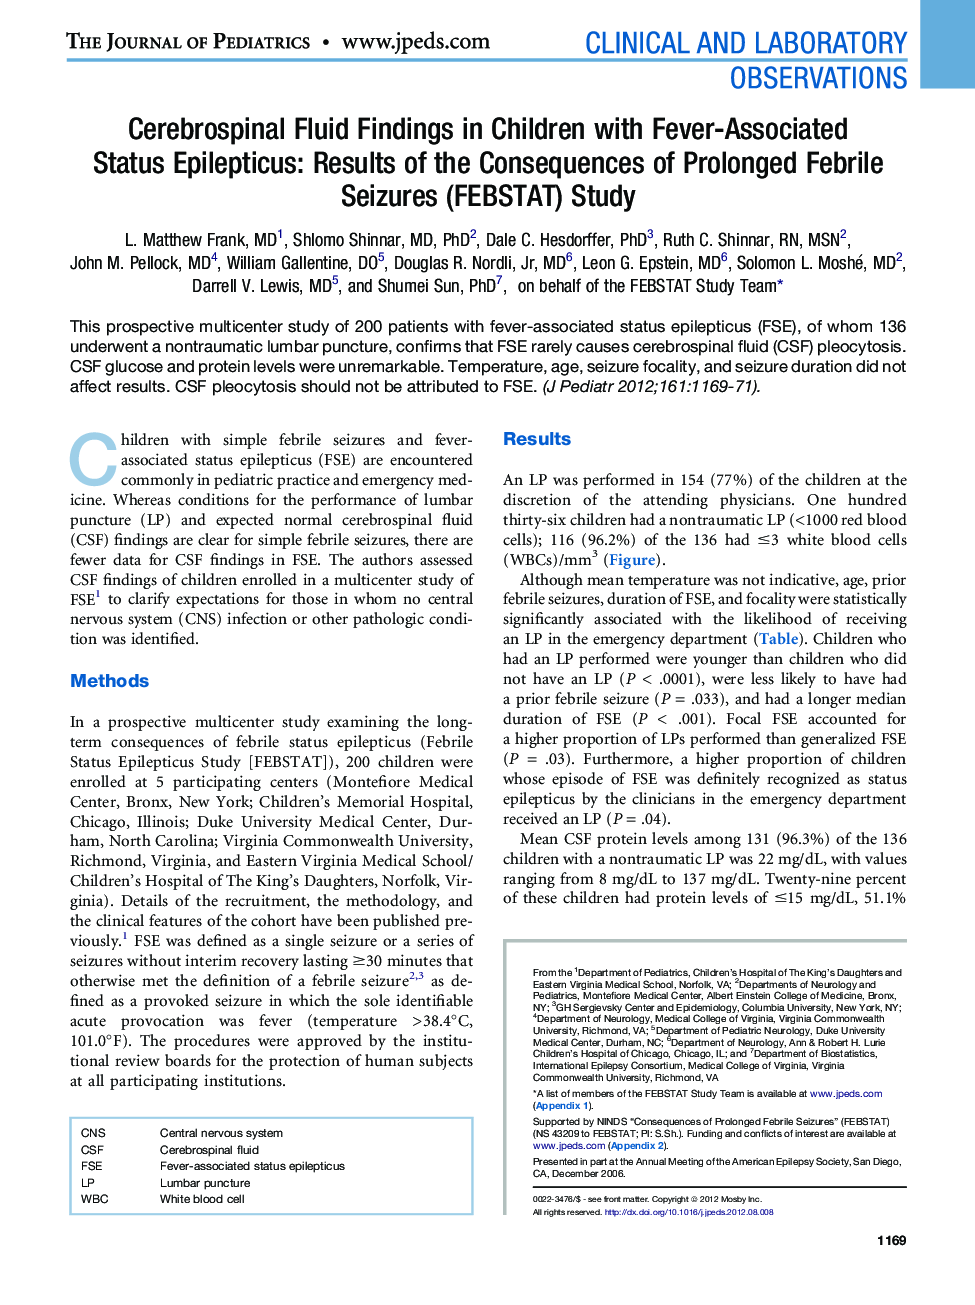 Cerebrospinal Fluid Findings in Children with Fever-Associated Status Epilepticus: Results of the Consequences of Prolonged Febrile Seizures (FEBSTAT) Study